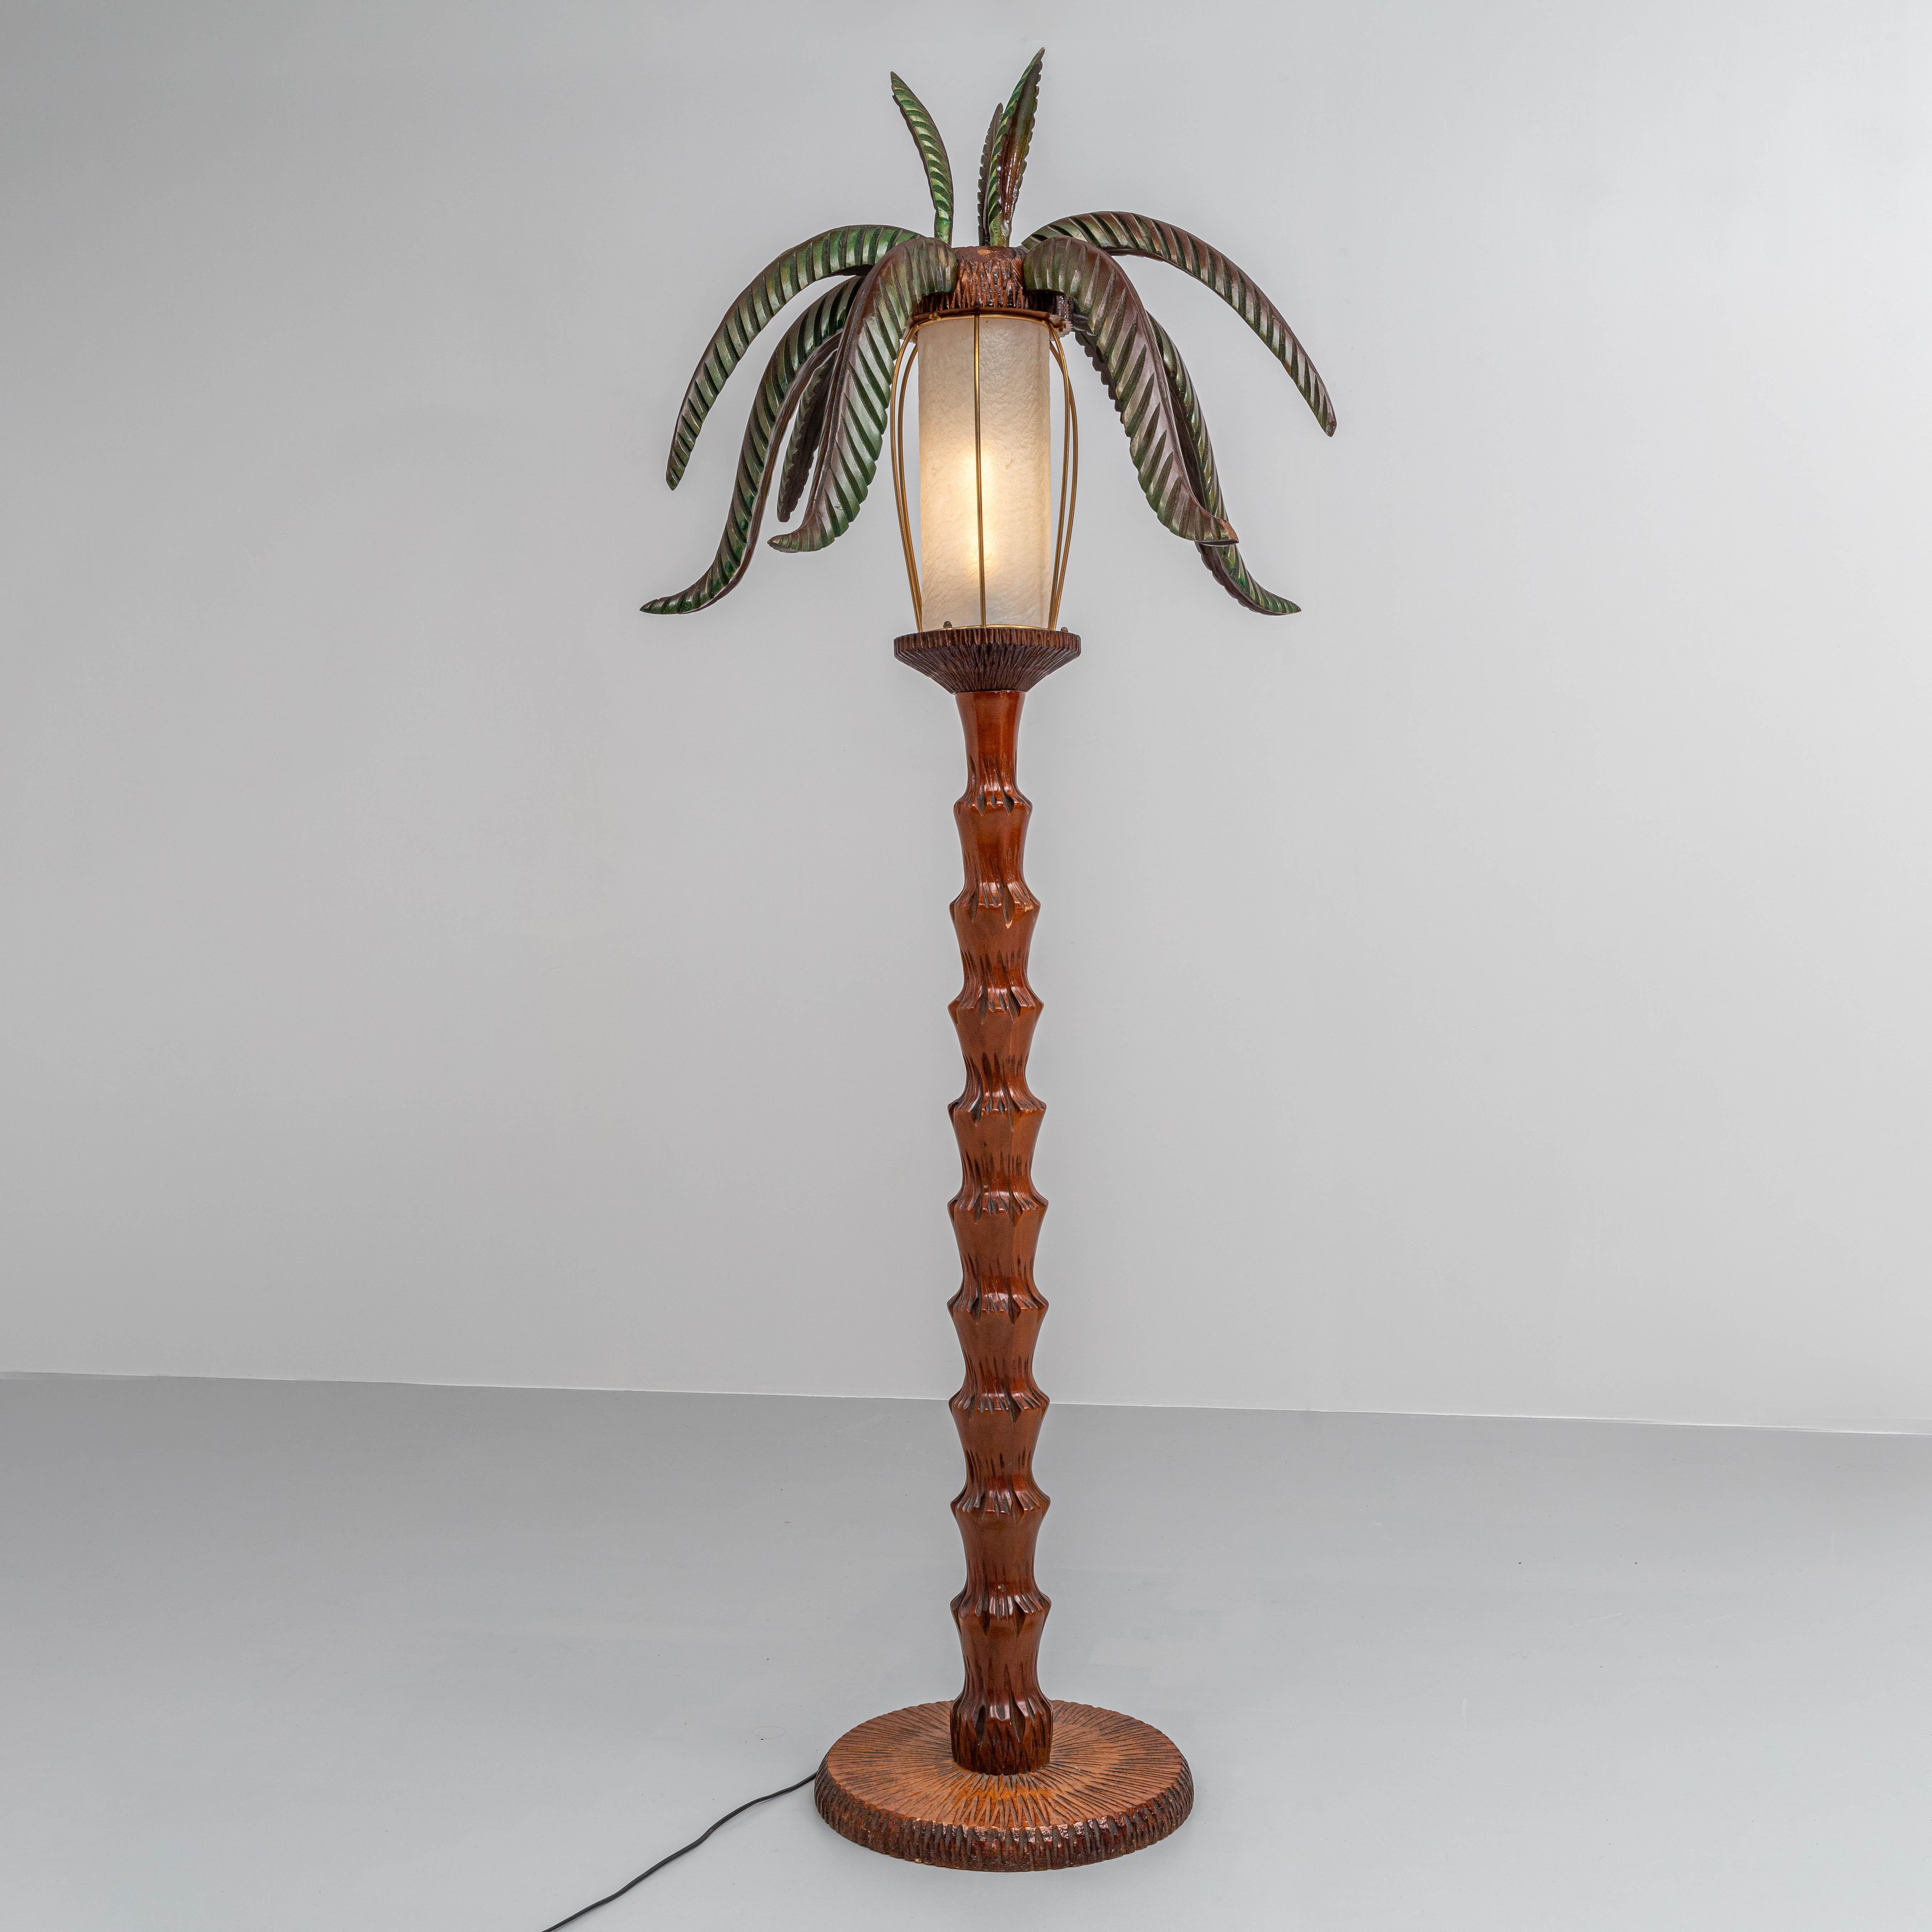 Straight from Naples: a large Palm Lamp model in carved wood and with a lantern made out of skin. Pleasant light and kitch atmosphere are created by the elegantly shaped leaves that curve beautifully in different directions and the carved wood, that